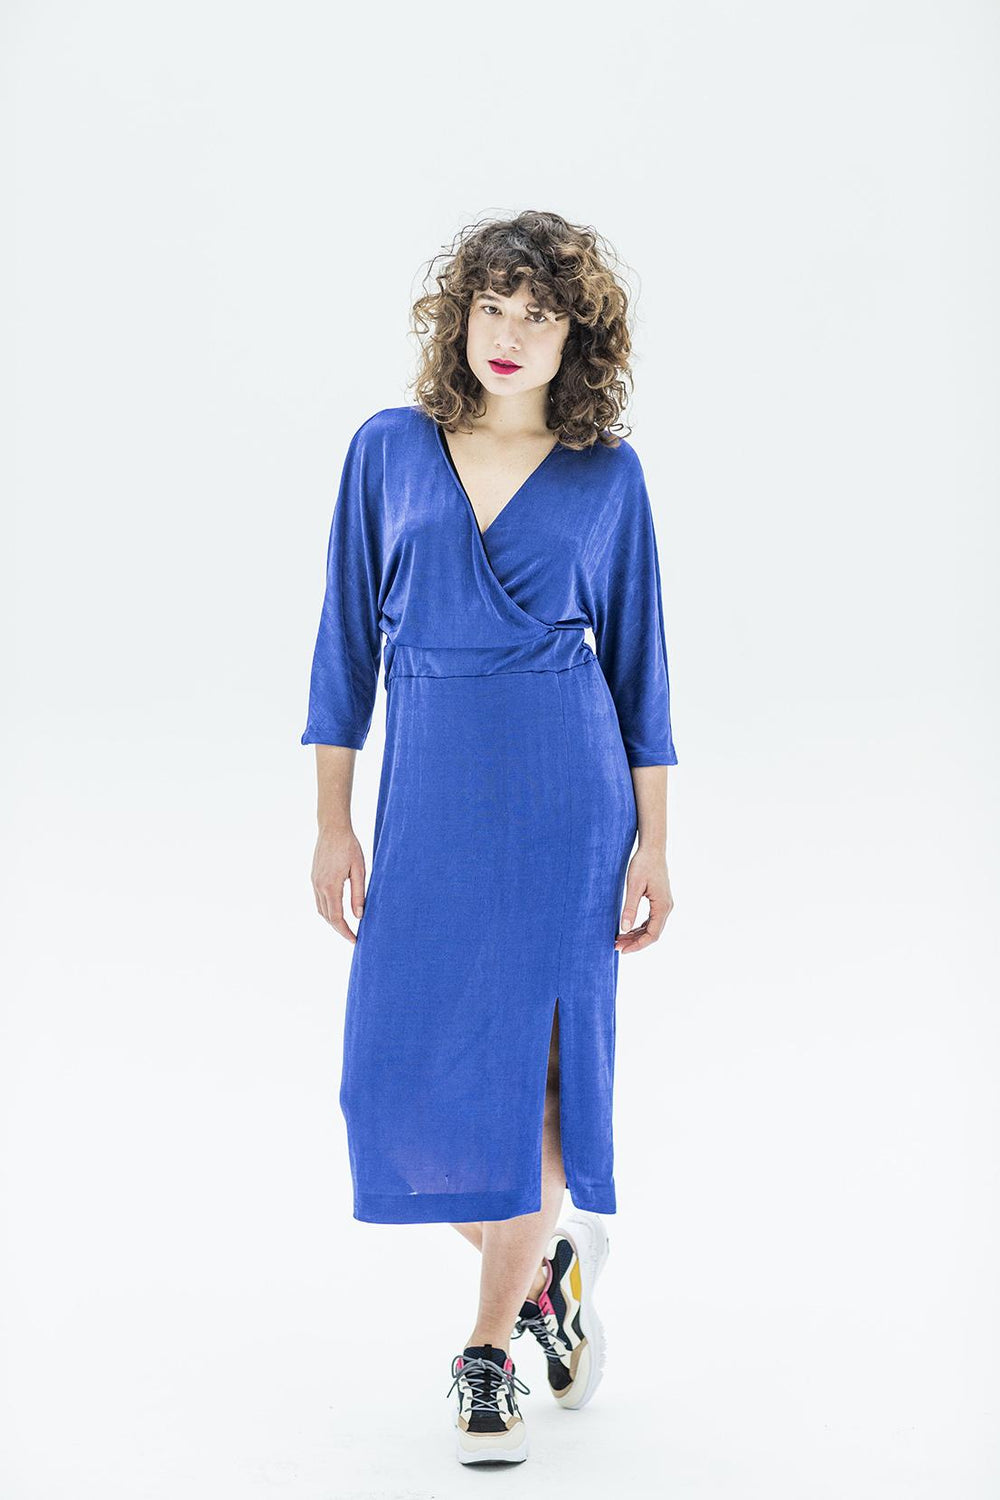 Woman wearing the Juliette Dress sewing pattern from Fibre Mood on The Fold Line. A wrap dress pattern made in Jersey fabrics, featuring an open slit at the front hem, elasticated waistband, ¾ length sleeves, V-neck and midi length.